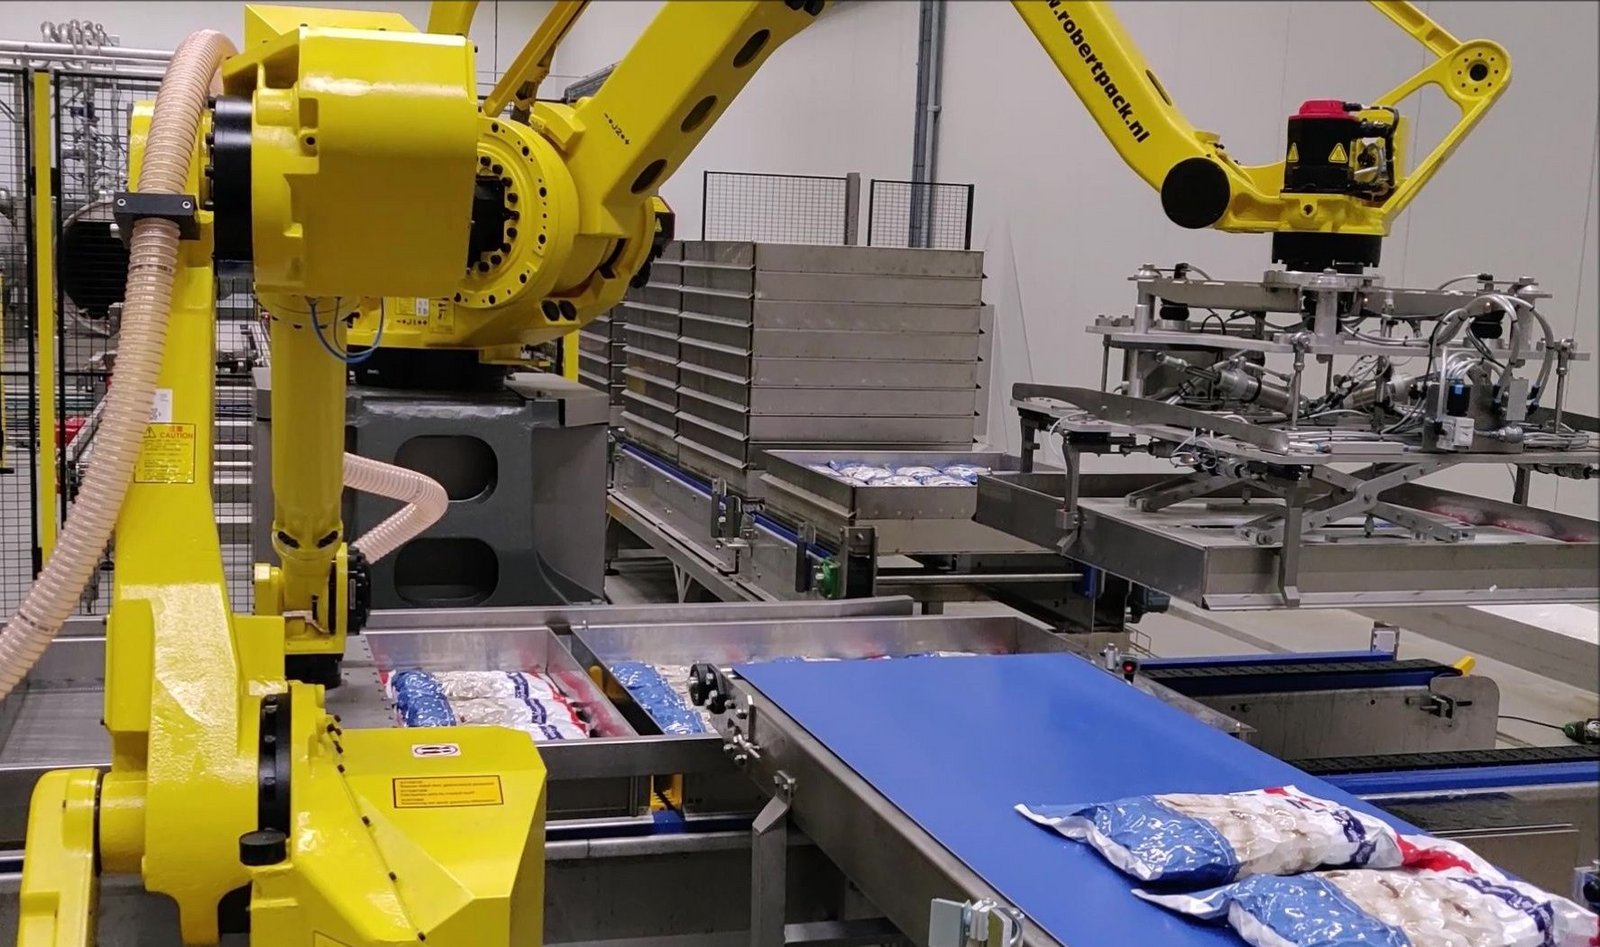  fanuc-handling-robot-for-the-mushroom-industry-supplied-by-robertpack-Zwolle